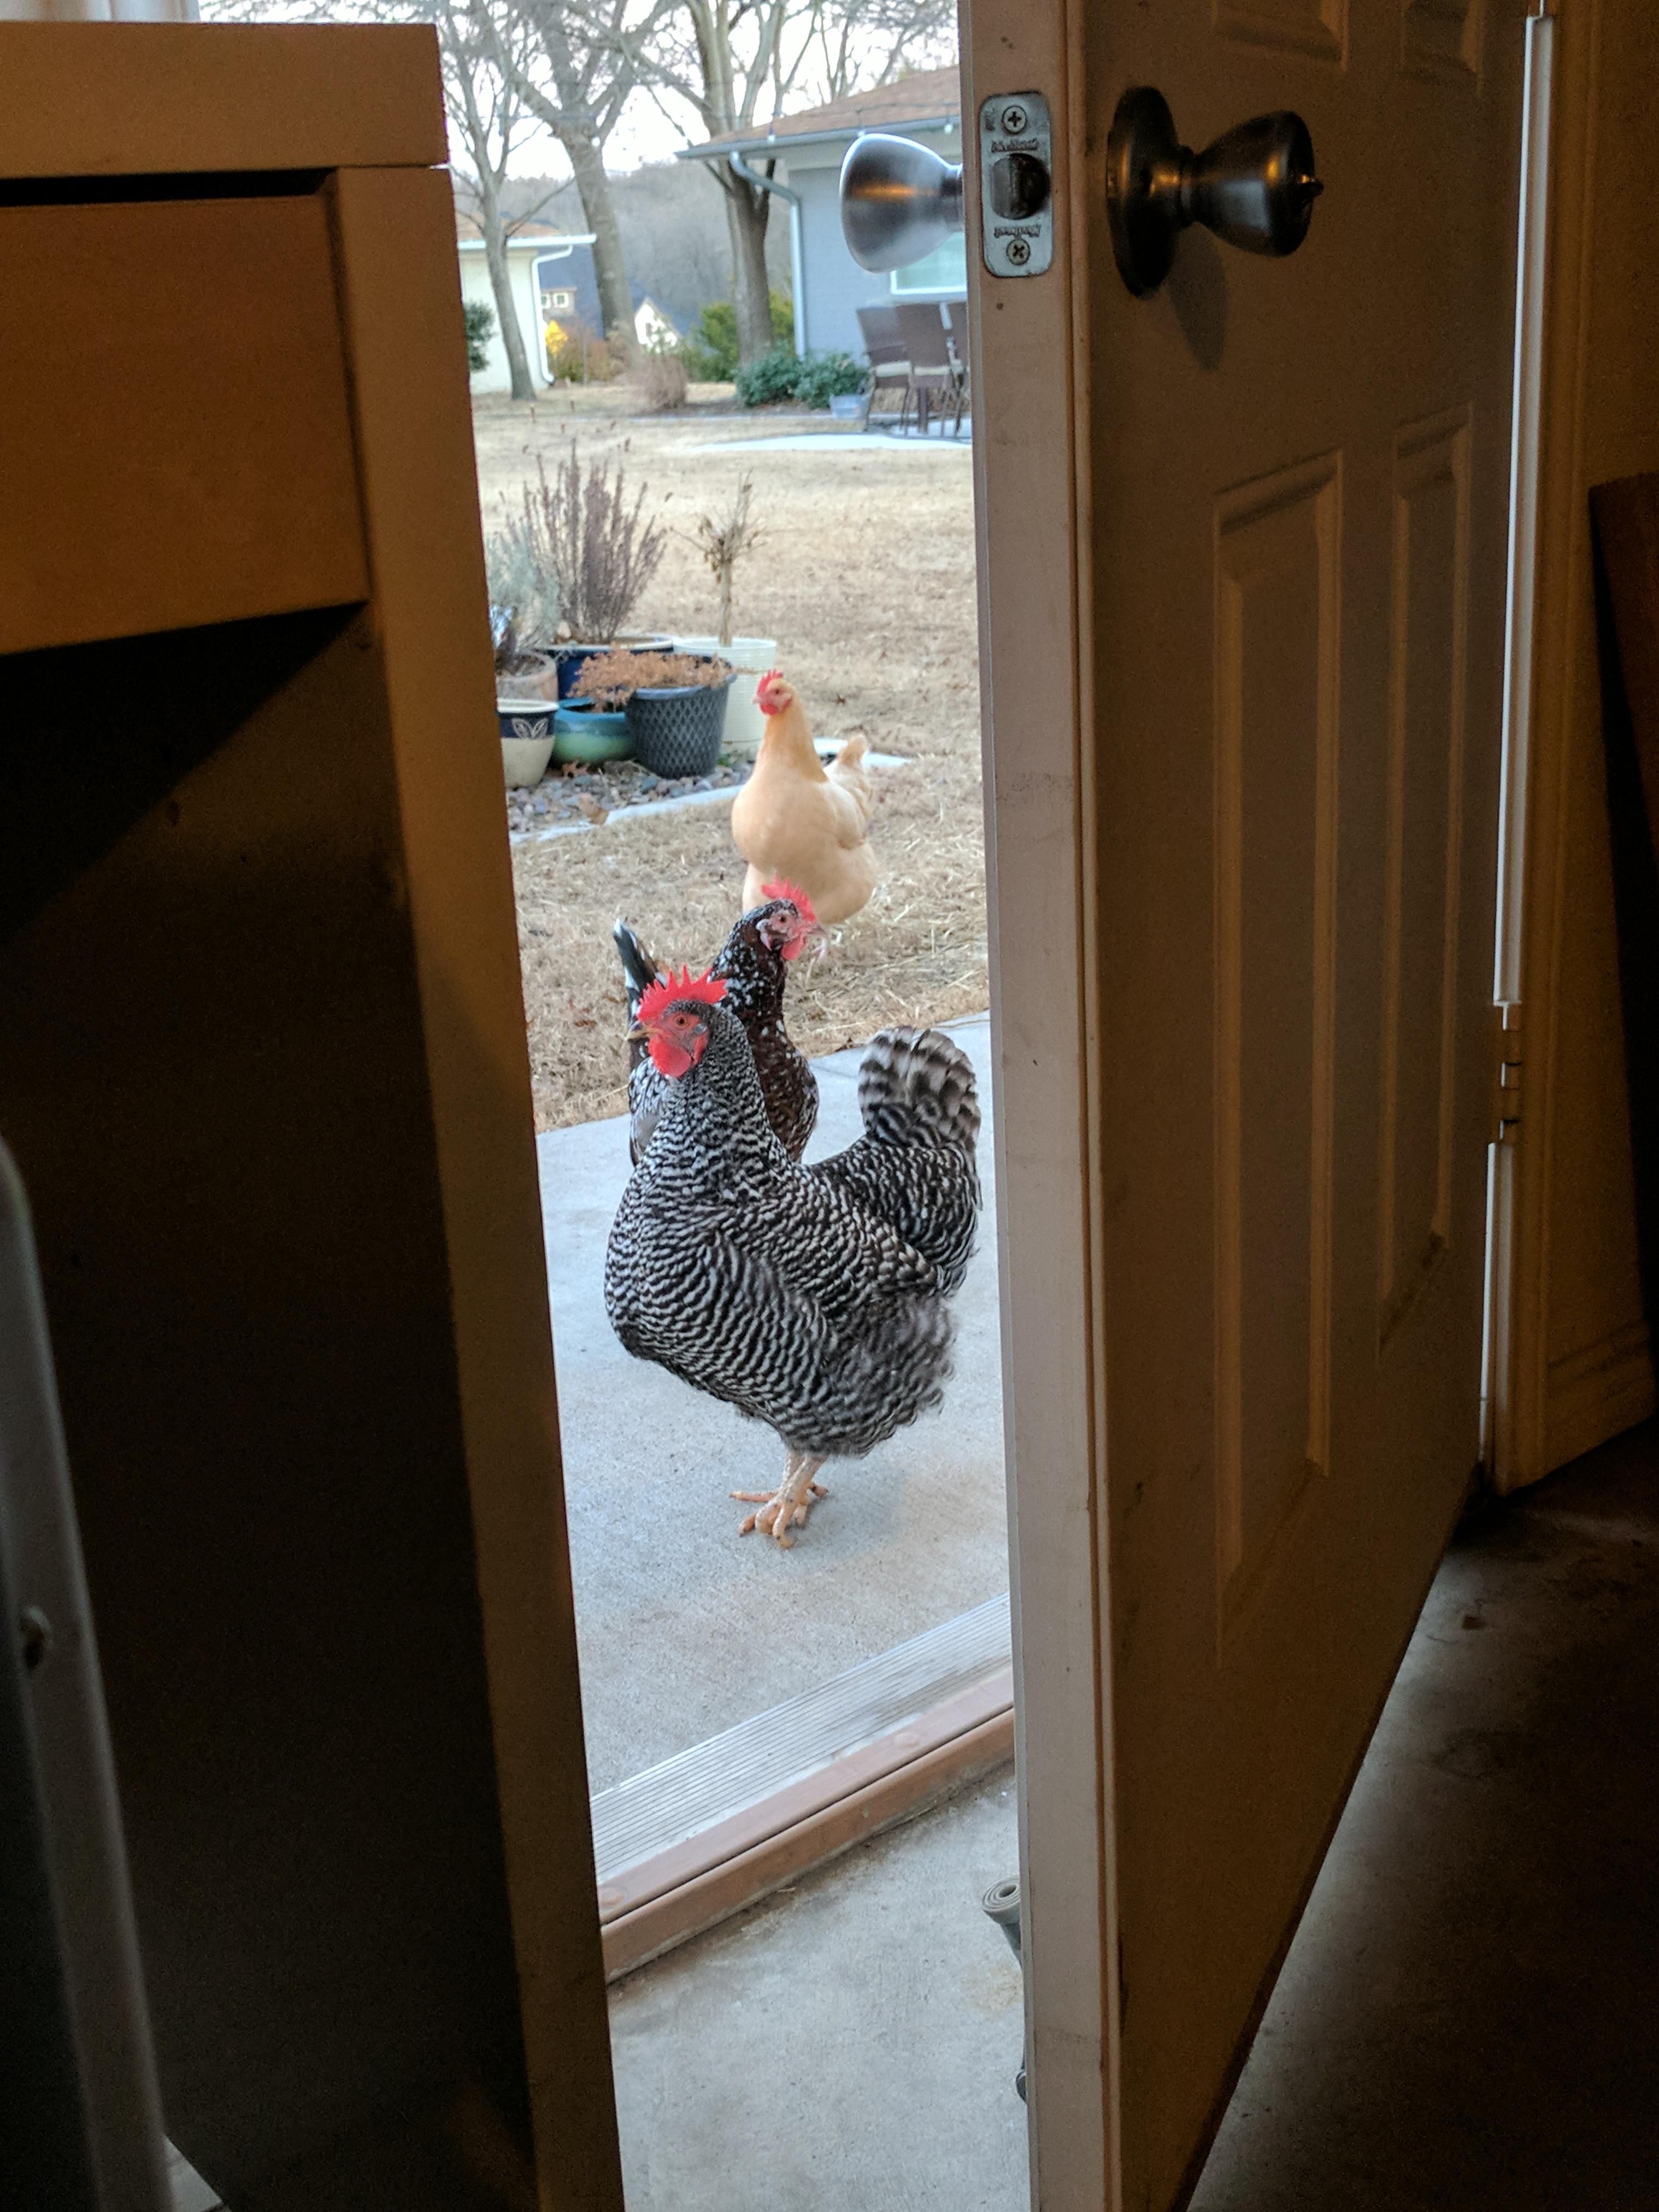 They've surrounded the exit, tell my wife she was wrong about the chickens...